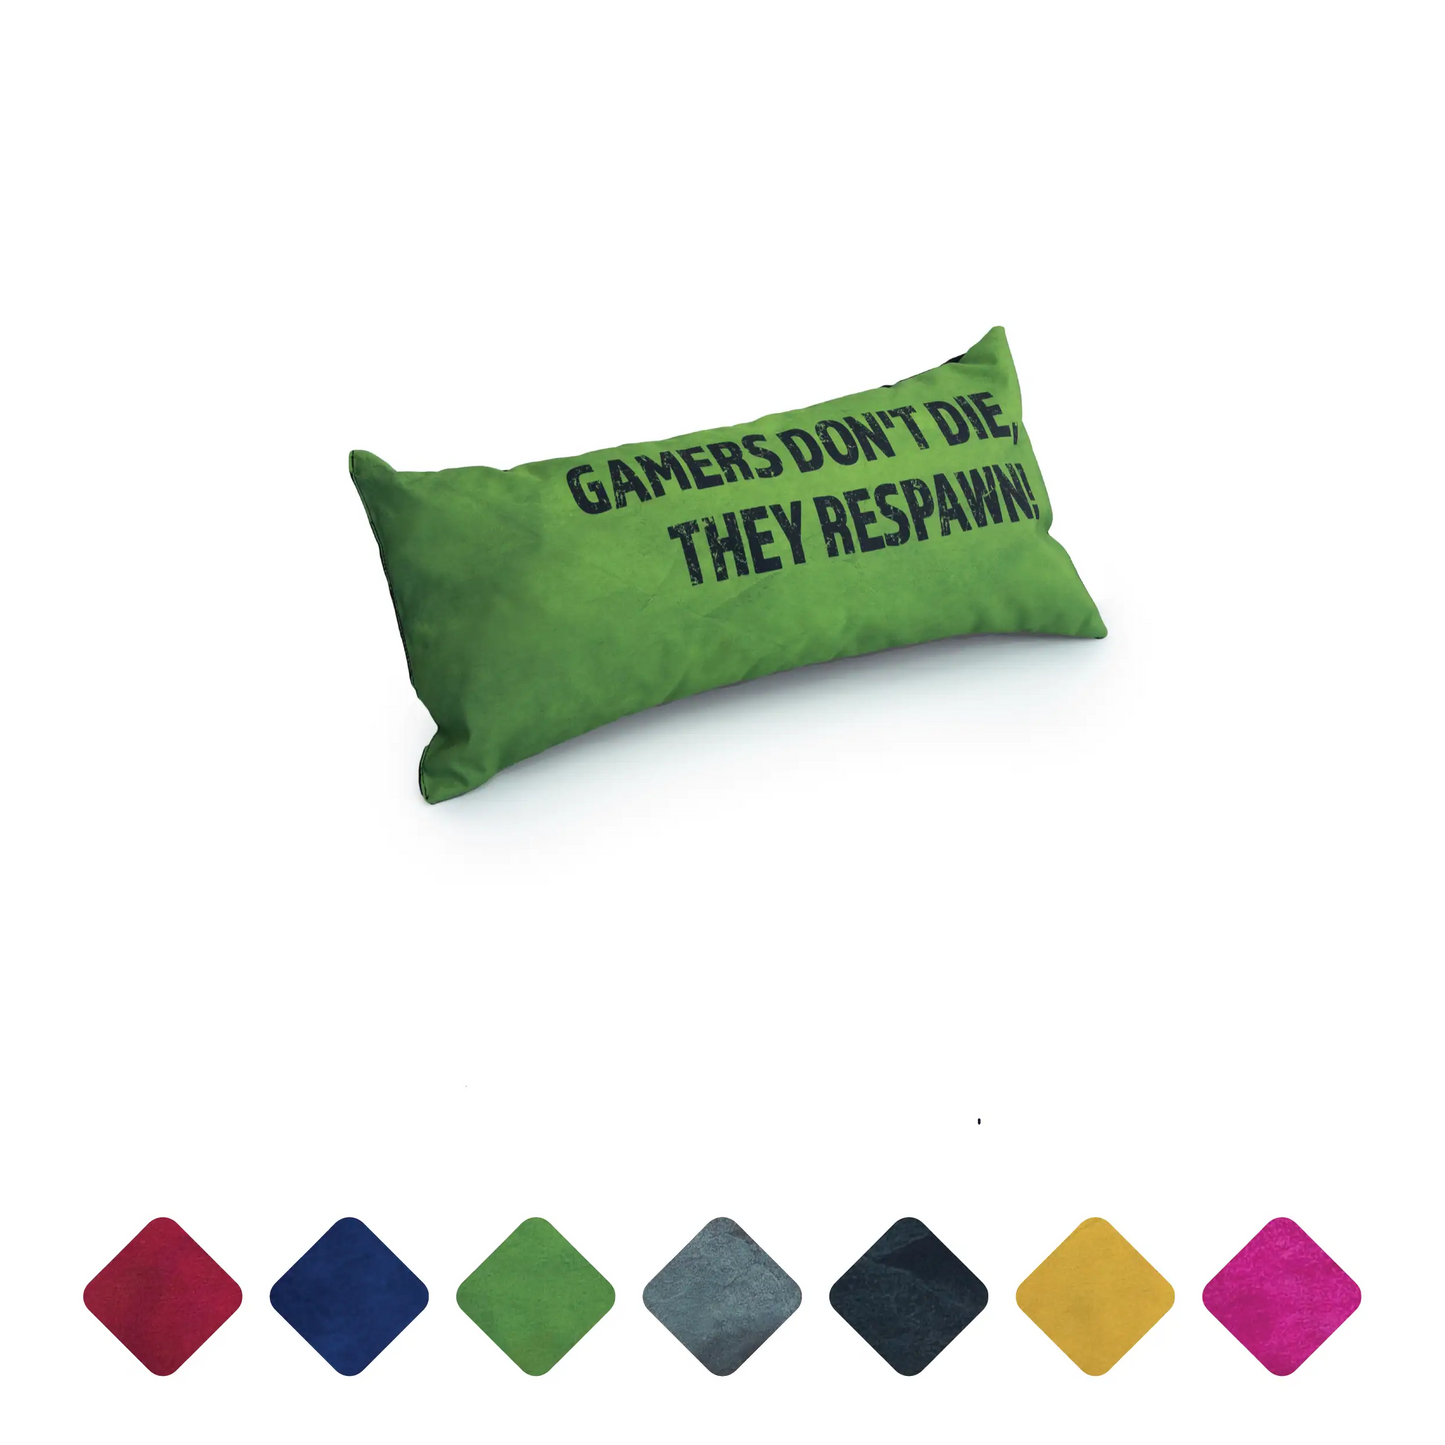 A green pillow with the text "GAMERS DON'T DIE THEY RESPAWN" in white letters.